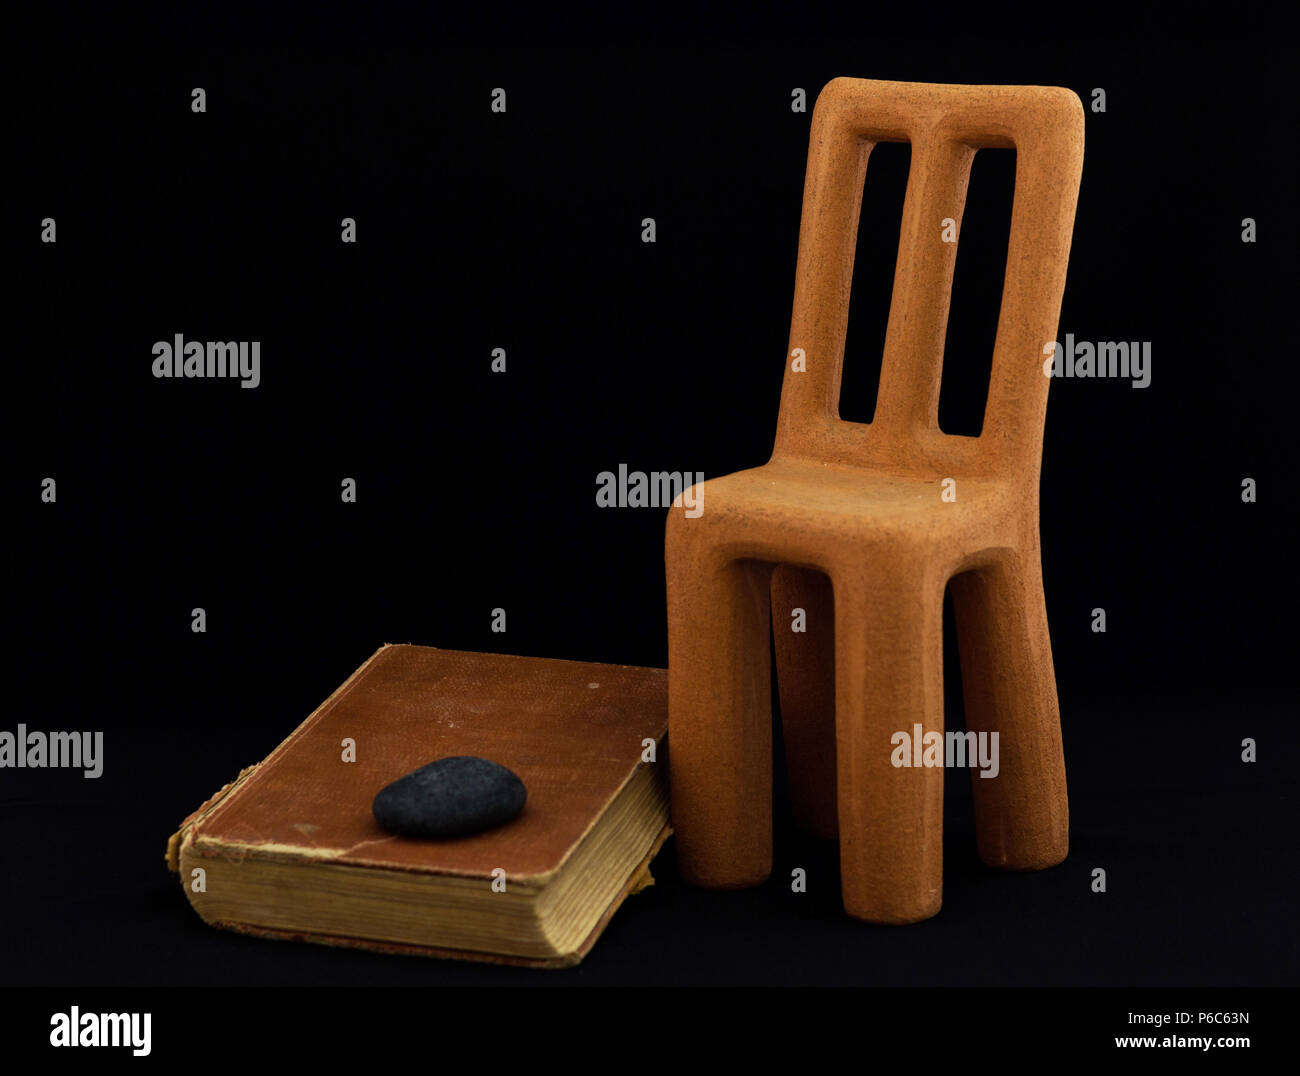 Clay chair, vintage book, black stone Stock Photo